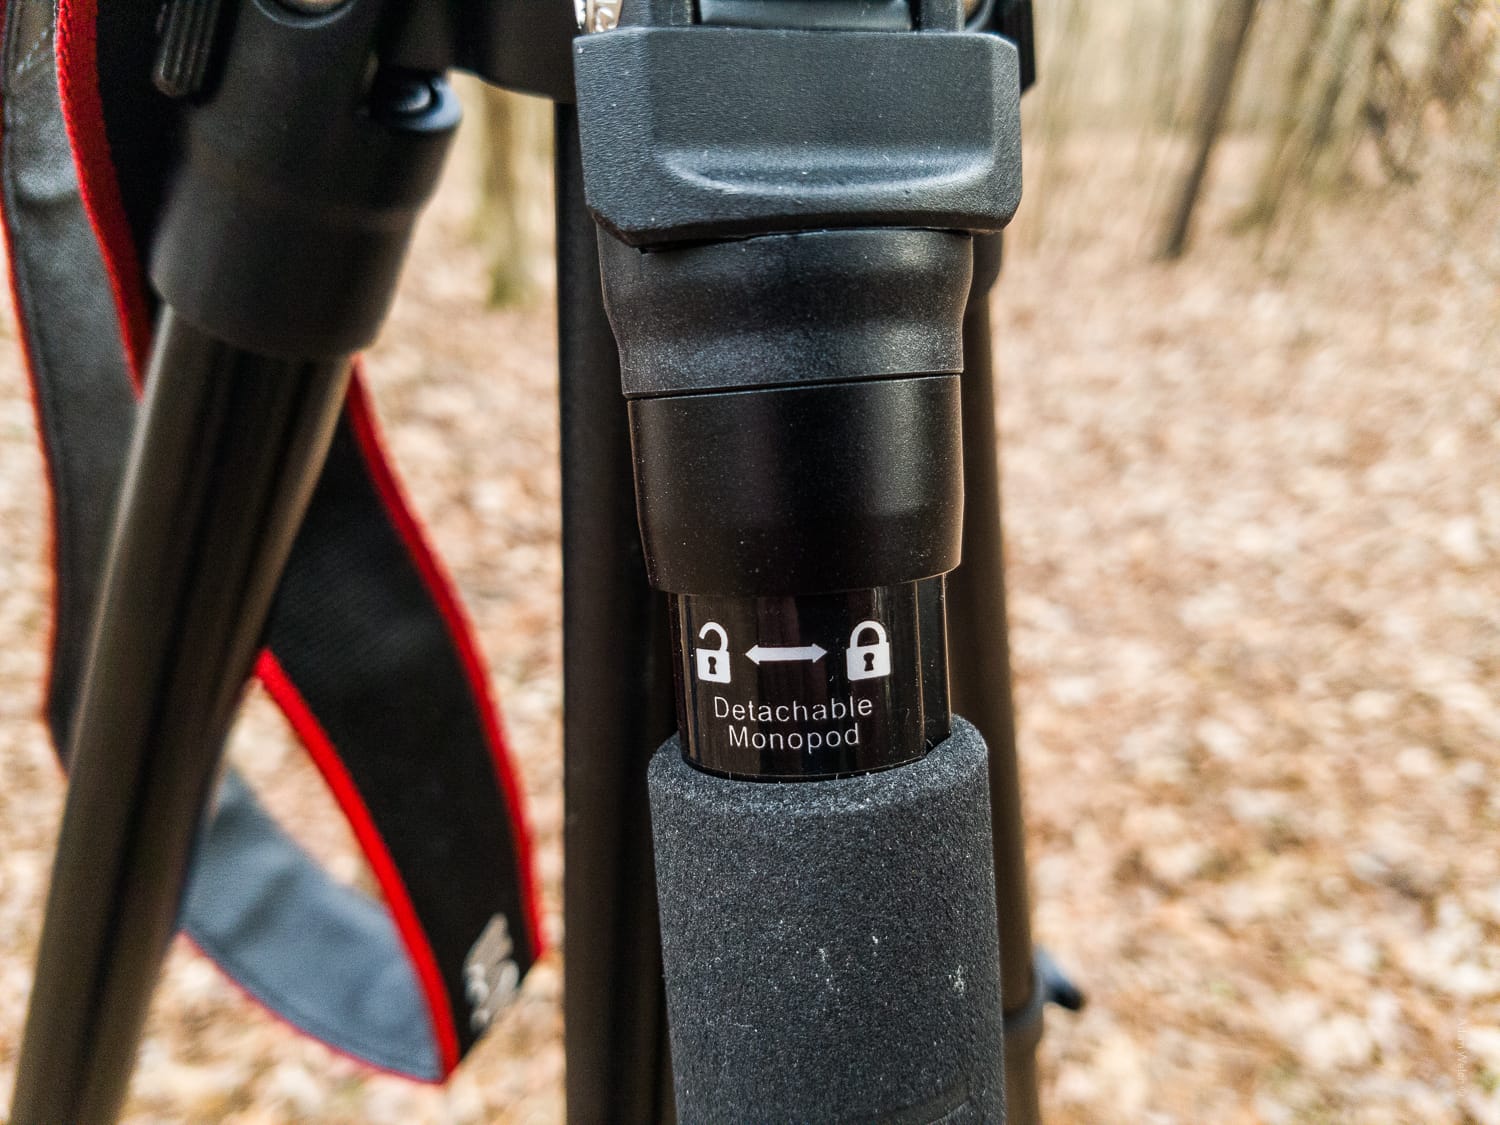 Hands-On Review of the K&F Concept TM2524 Lightweight Travel Tripod